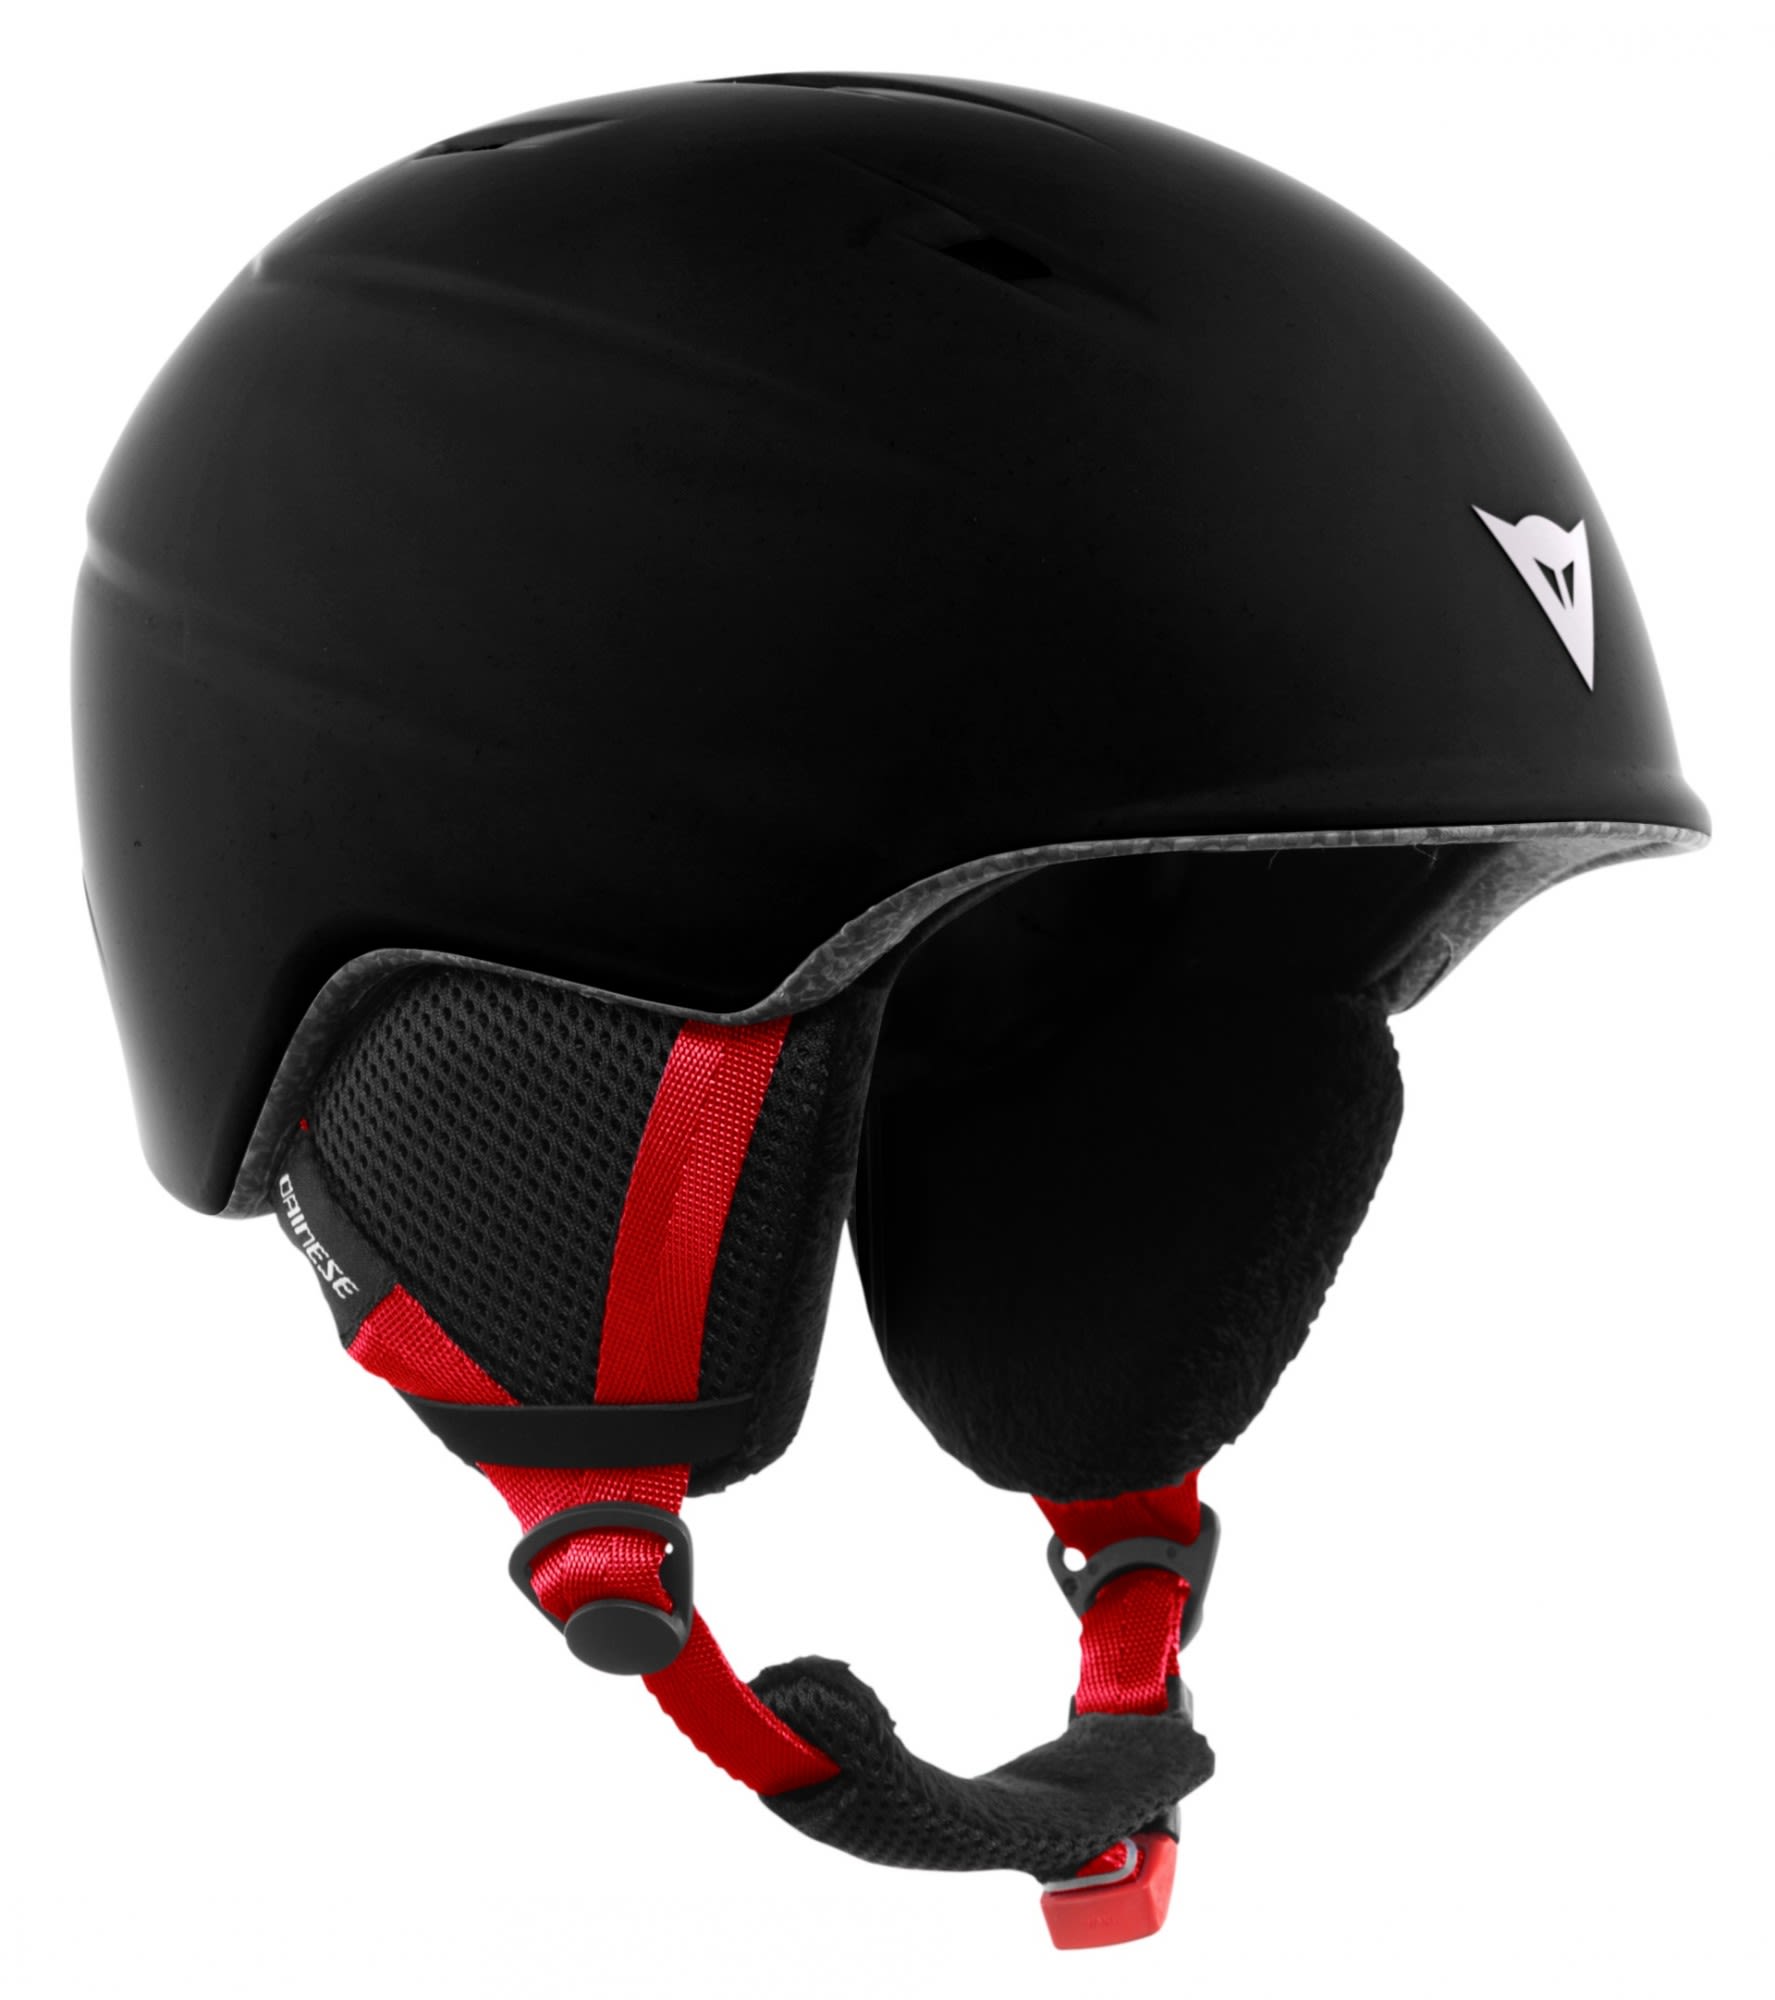 Dainese Atmungsaktiver robuster Kinder ABS Skisport Helm Stretch Limo - High Risk Red